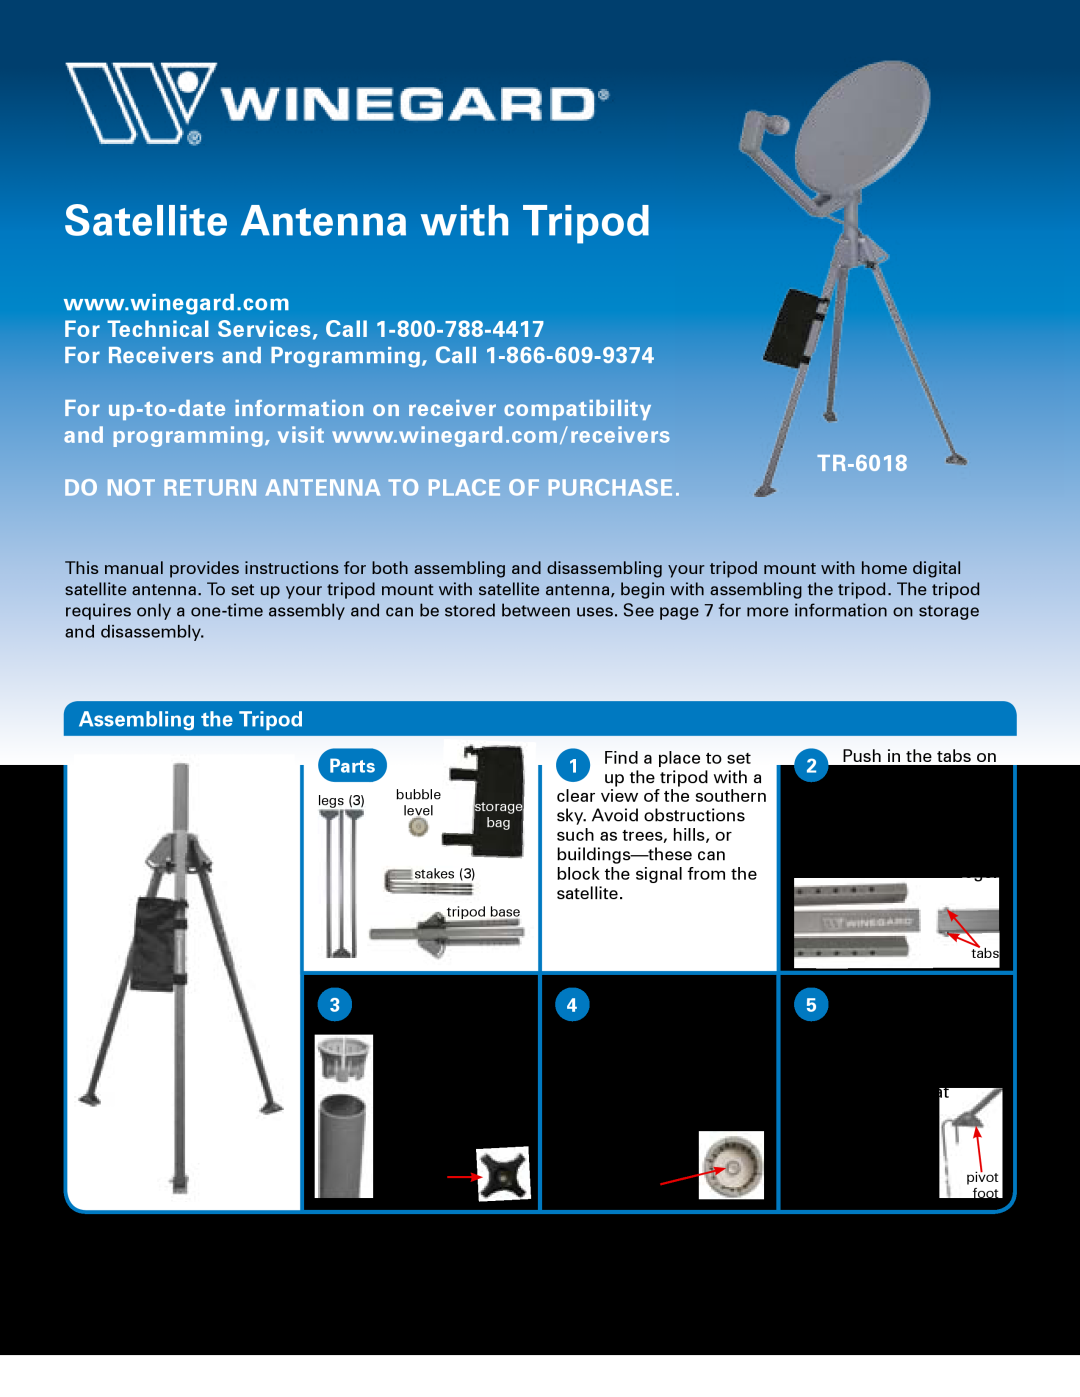 Winegard TR-6018 manual Assembling the Tripod, Parts, Satellite Antenna with Tripod 